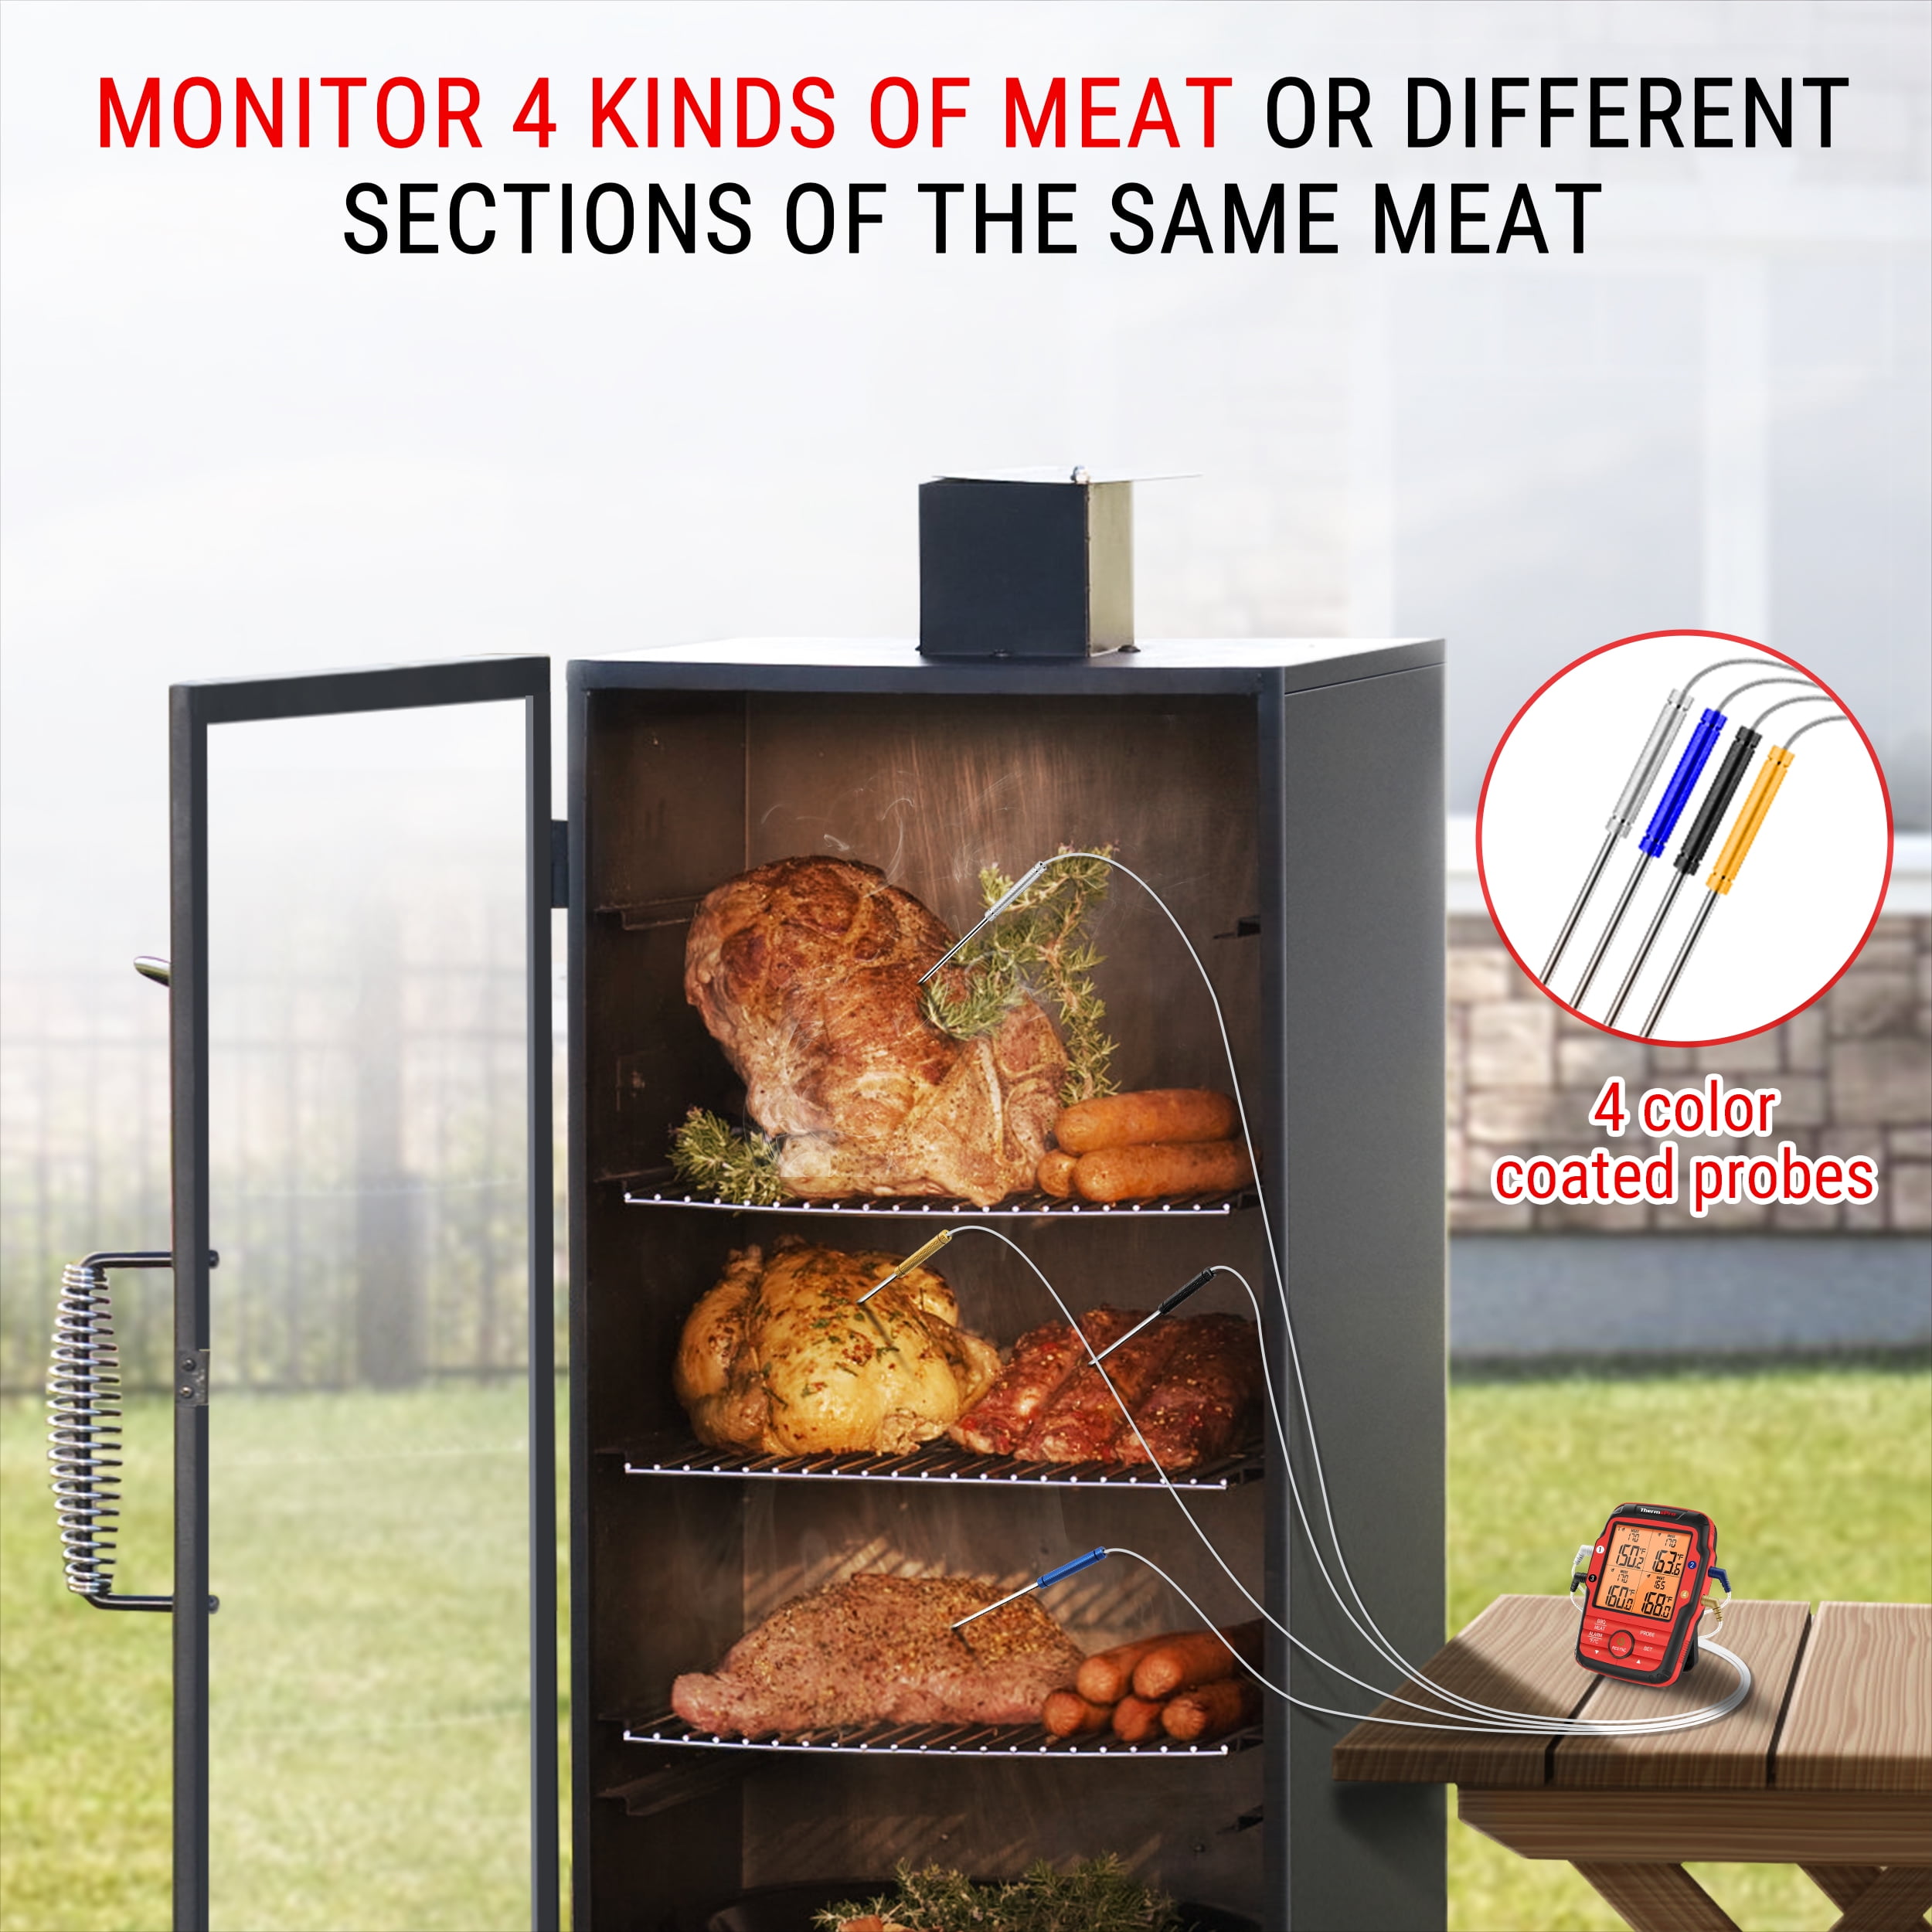 4 - Meat Thermometers for Cooking Meat